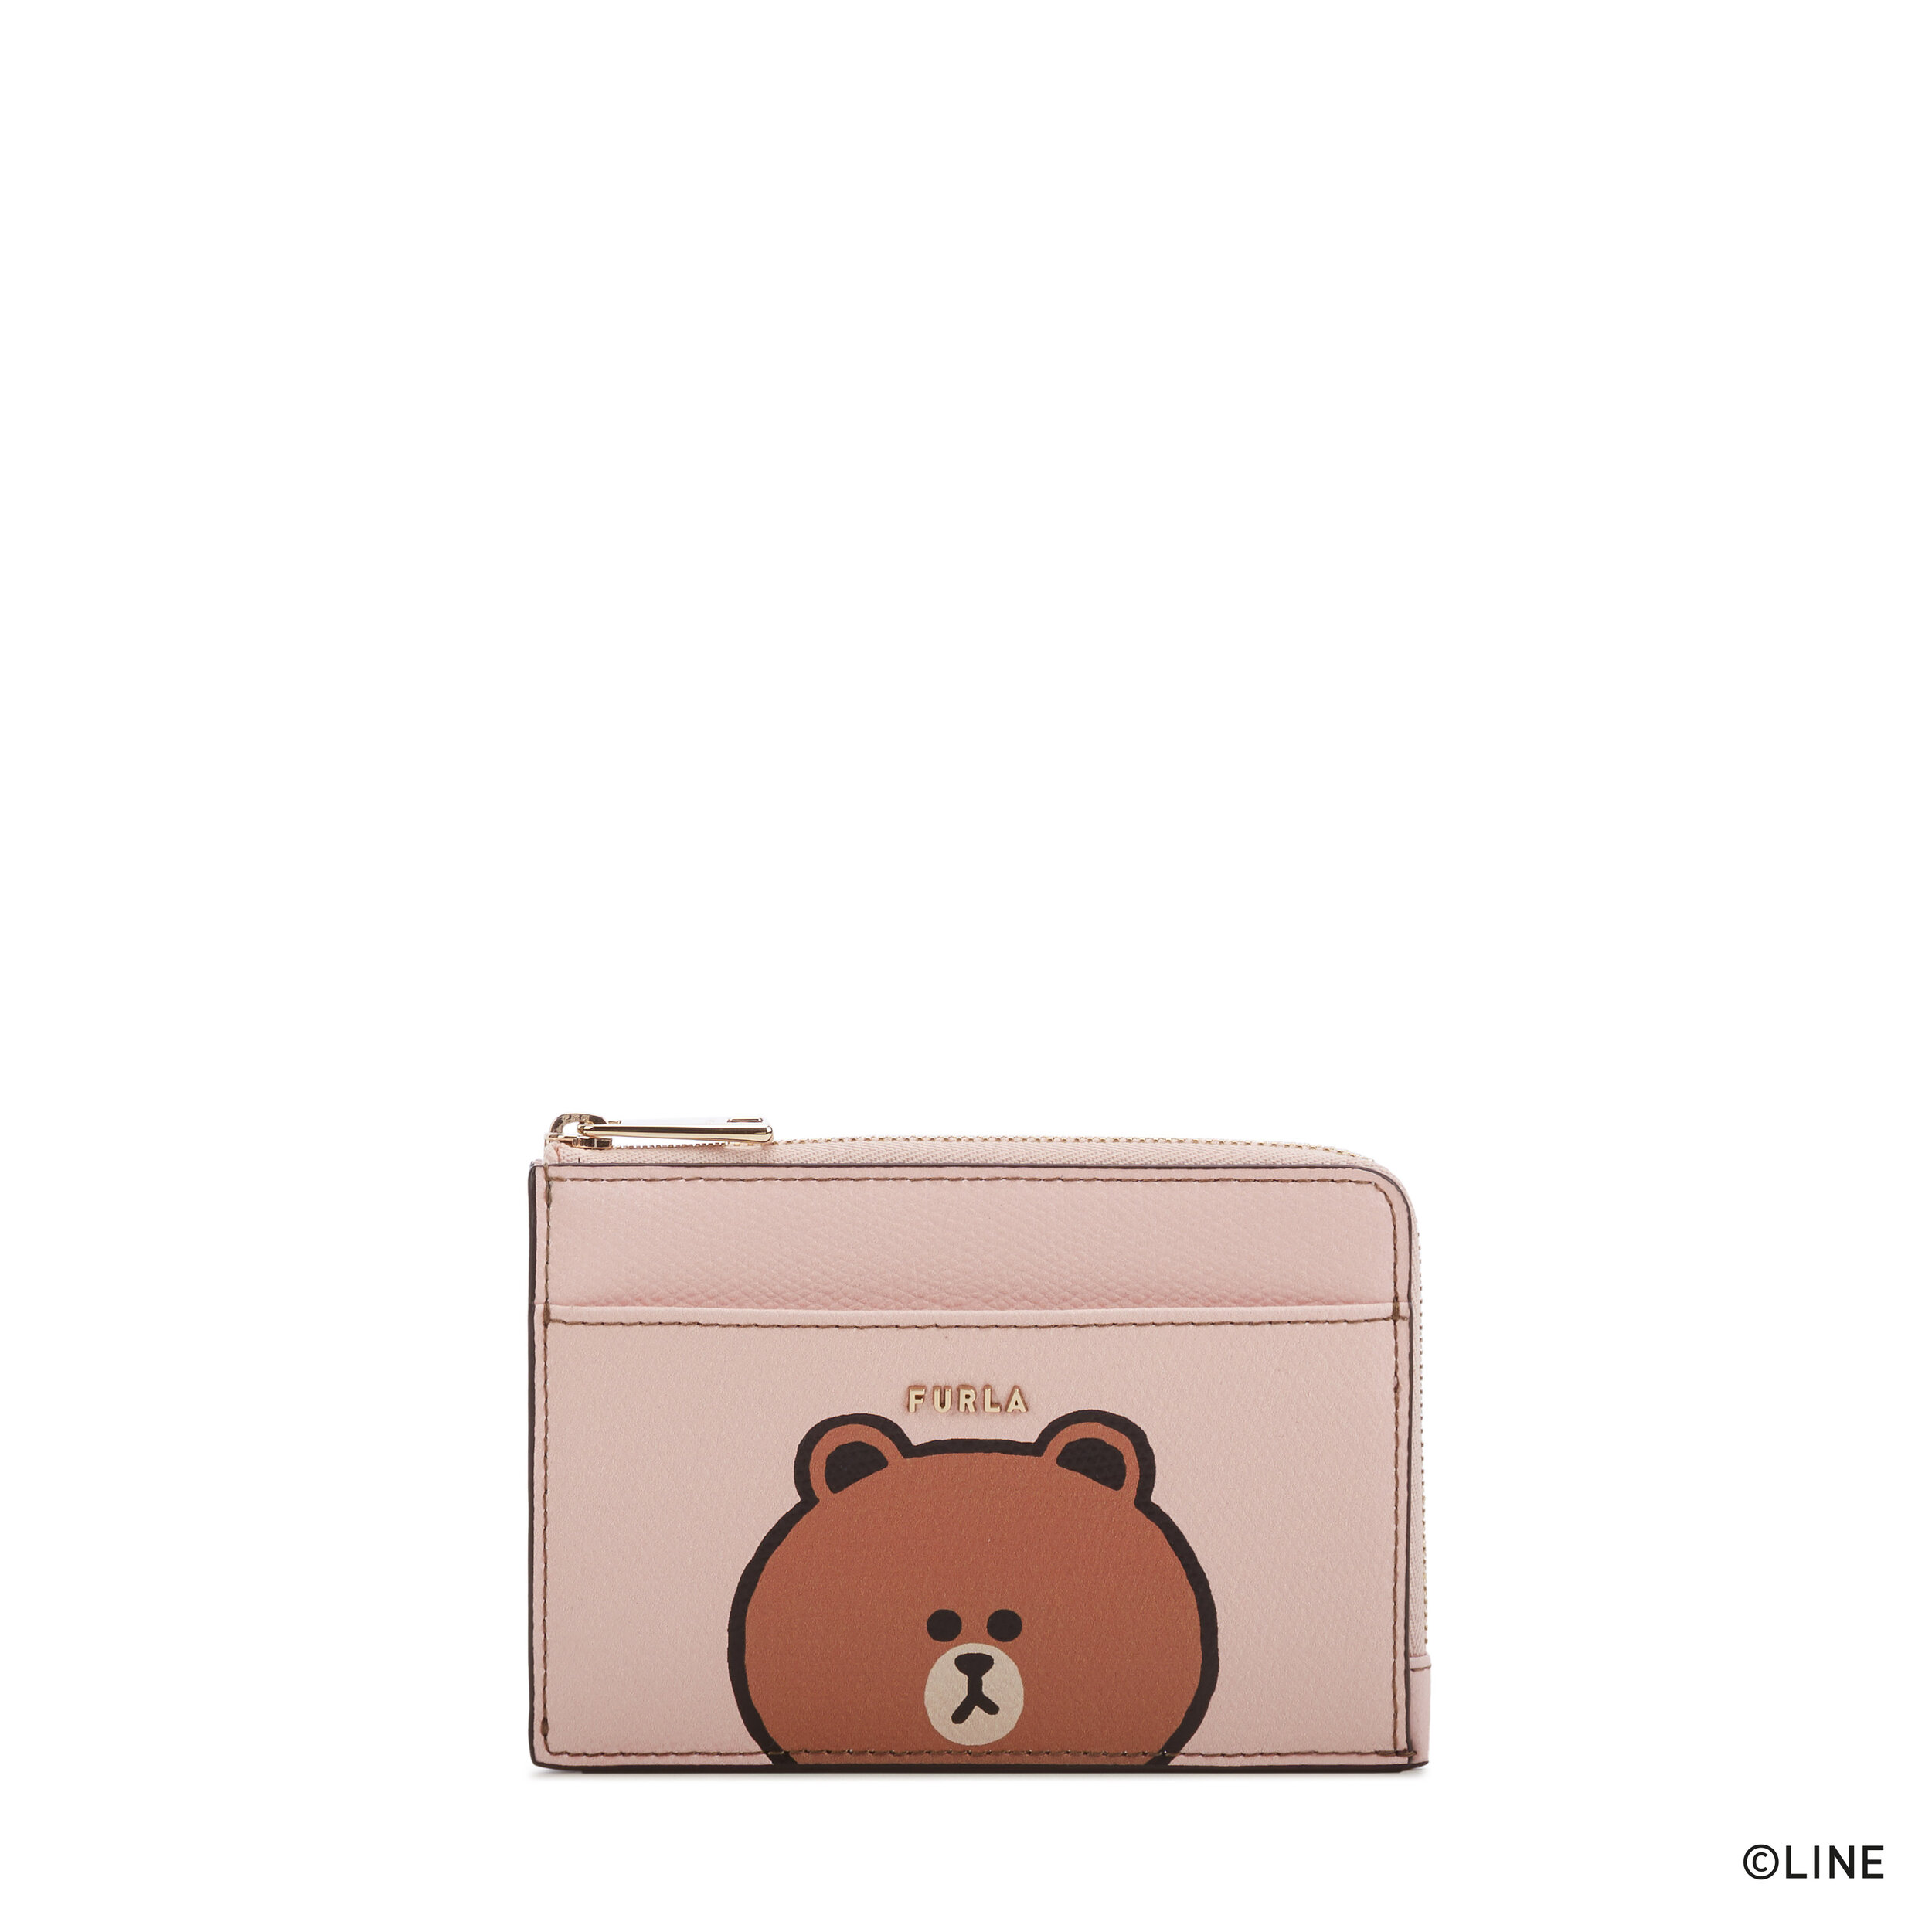 FURLA LINE FRIENDS M CARD CASE_BROWN PRINT ON ARES TEXTURED LEATHER_LF-copyright.jpg